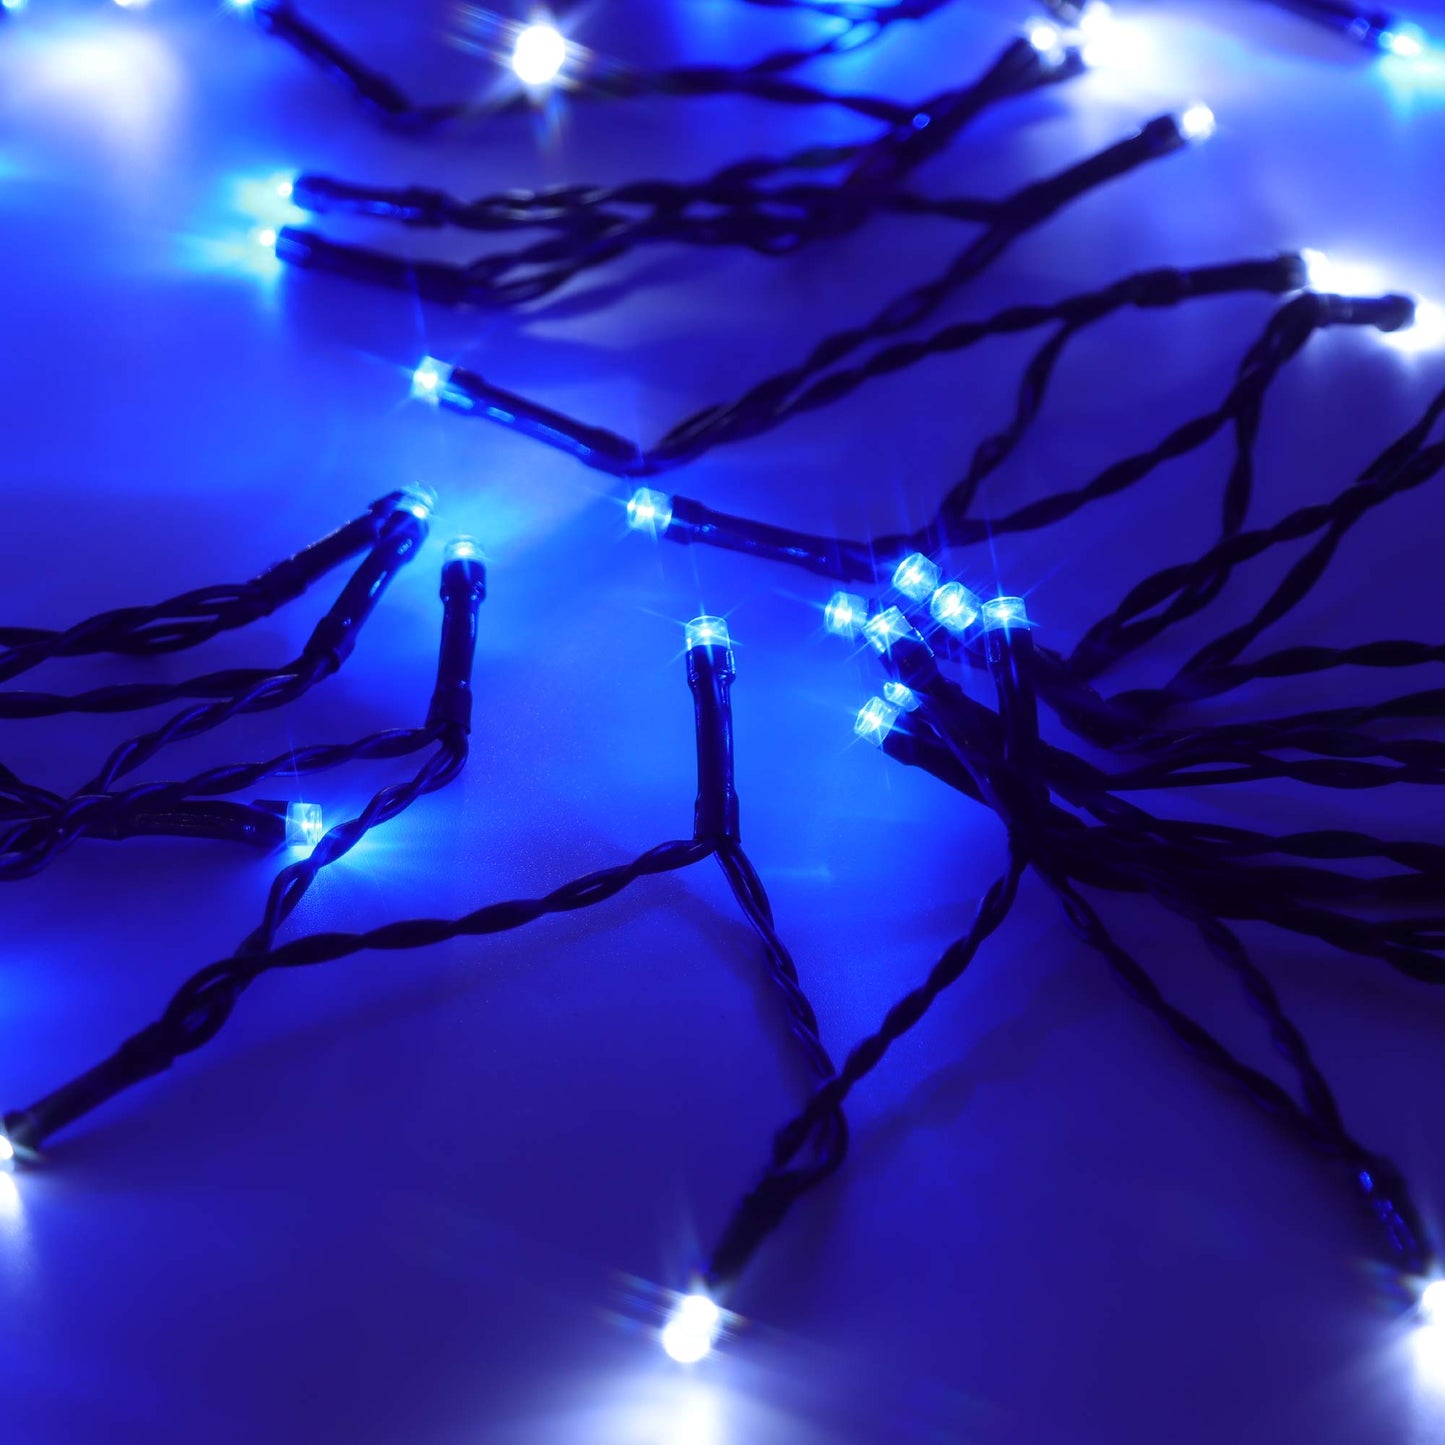 Christmas Sparkle Indoor and Outdoor Chaser Lights x 200 Blue and White LEDs - Mains Operated